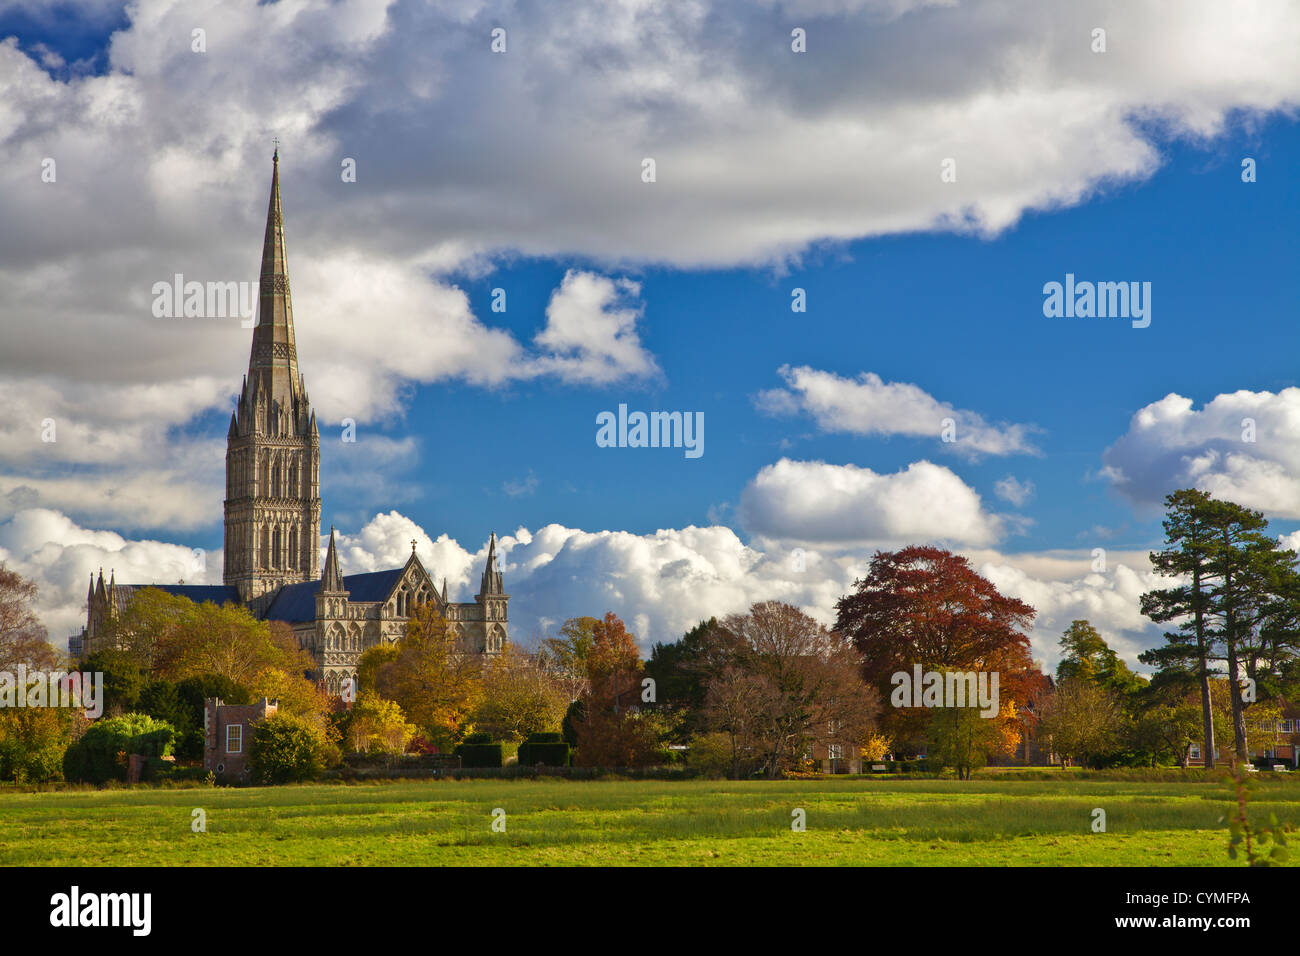 Autumn view of the spire of medieval Salisbury Cathedral, Wiltshire, England, UK. Mono version at CYMFTD Stock Photo